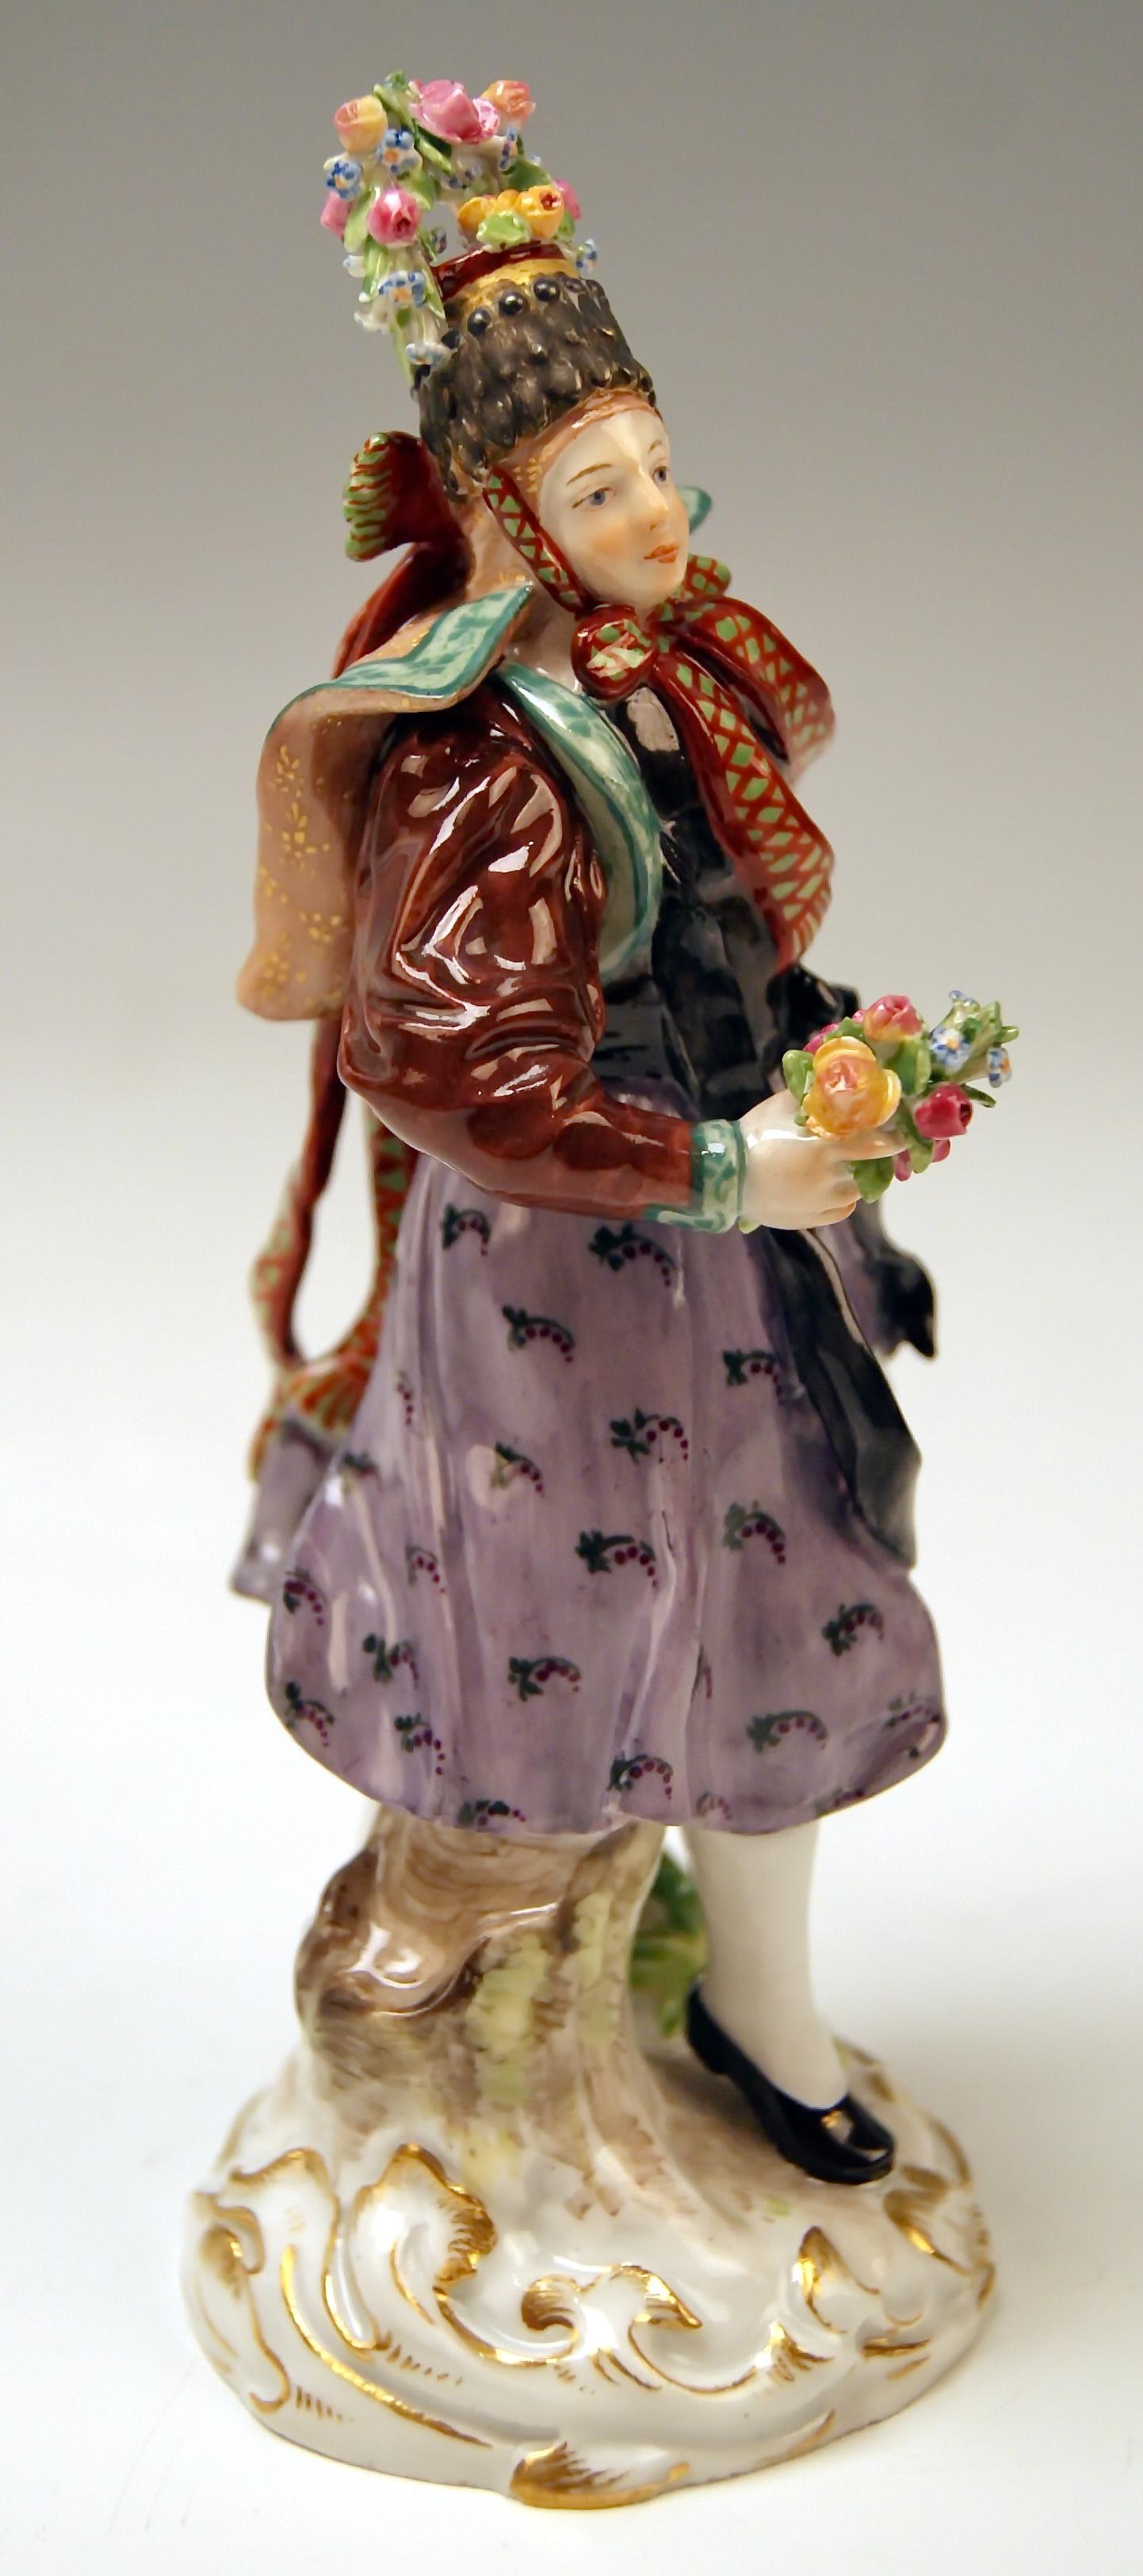 Meissen Lovely as well as rare female figurine: Peasant Woman, So-Said Hormetjungfer
Model Q 190 B

Size:
Height 5.90 inches (= 15.0 cm)
Diameter of base 2.28 inches (= 5.8 cm)

Manufactory: Meissen
Hallmarked: Blue Meissen Sword Mark